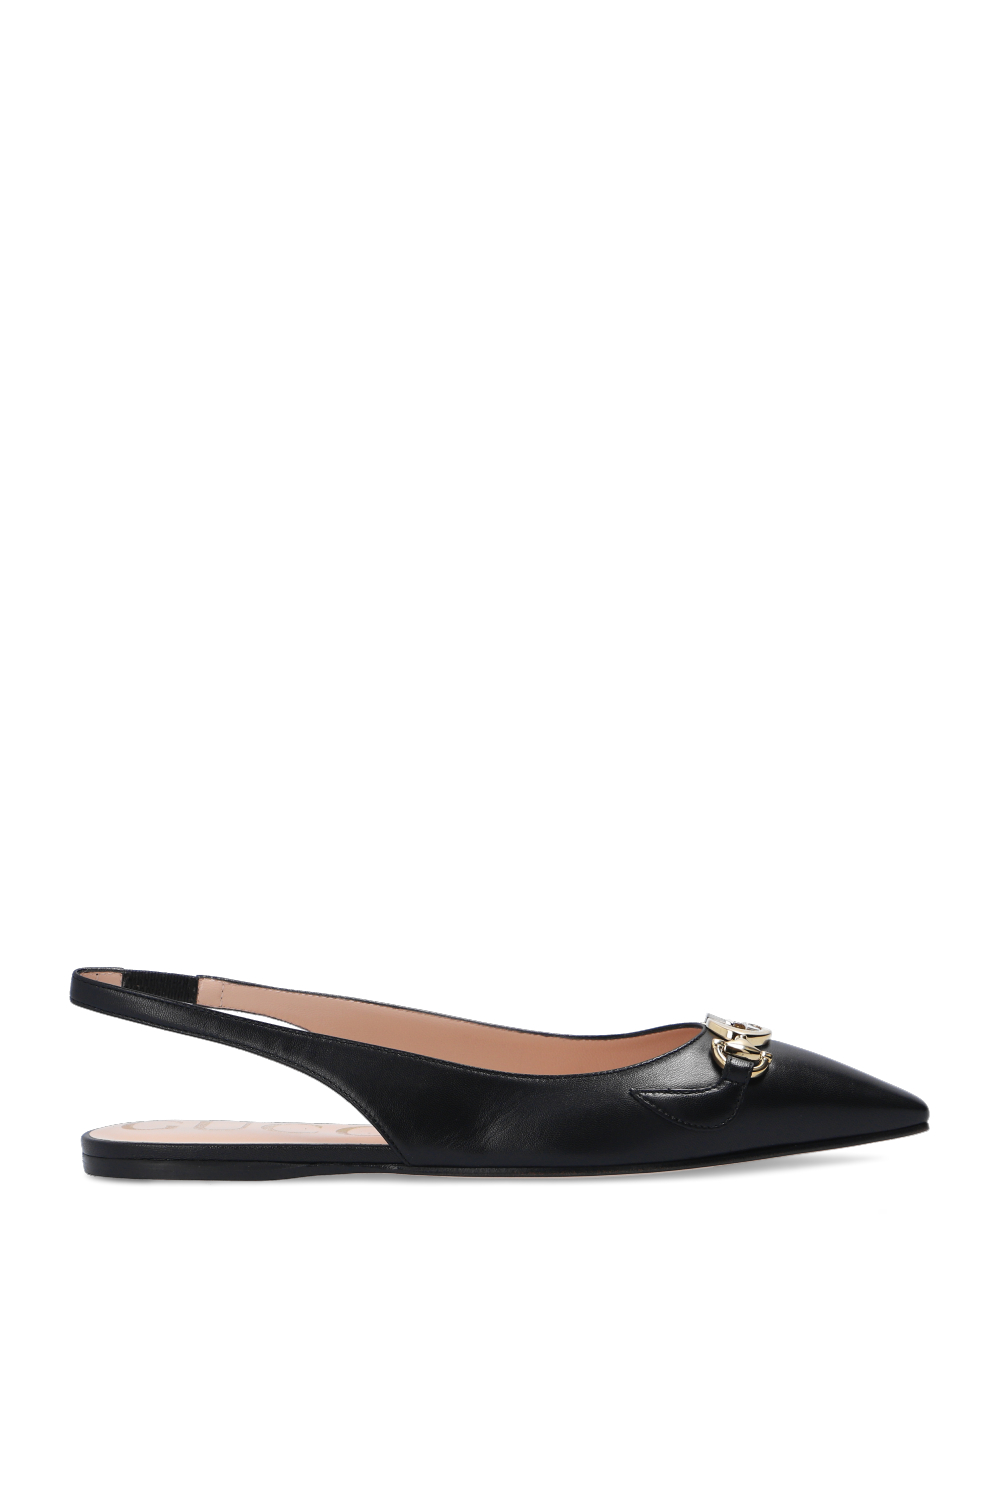 gucci pointed toe flats